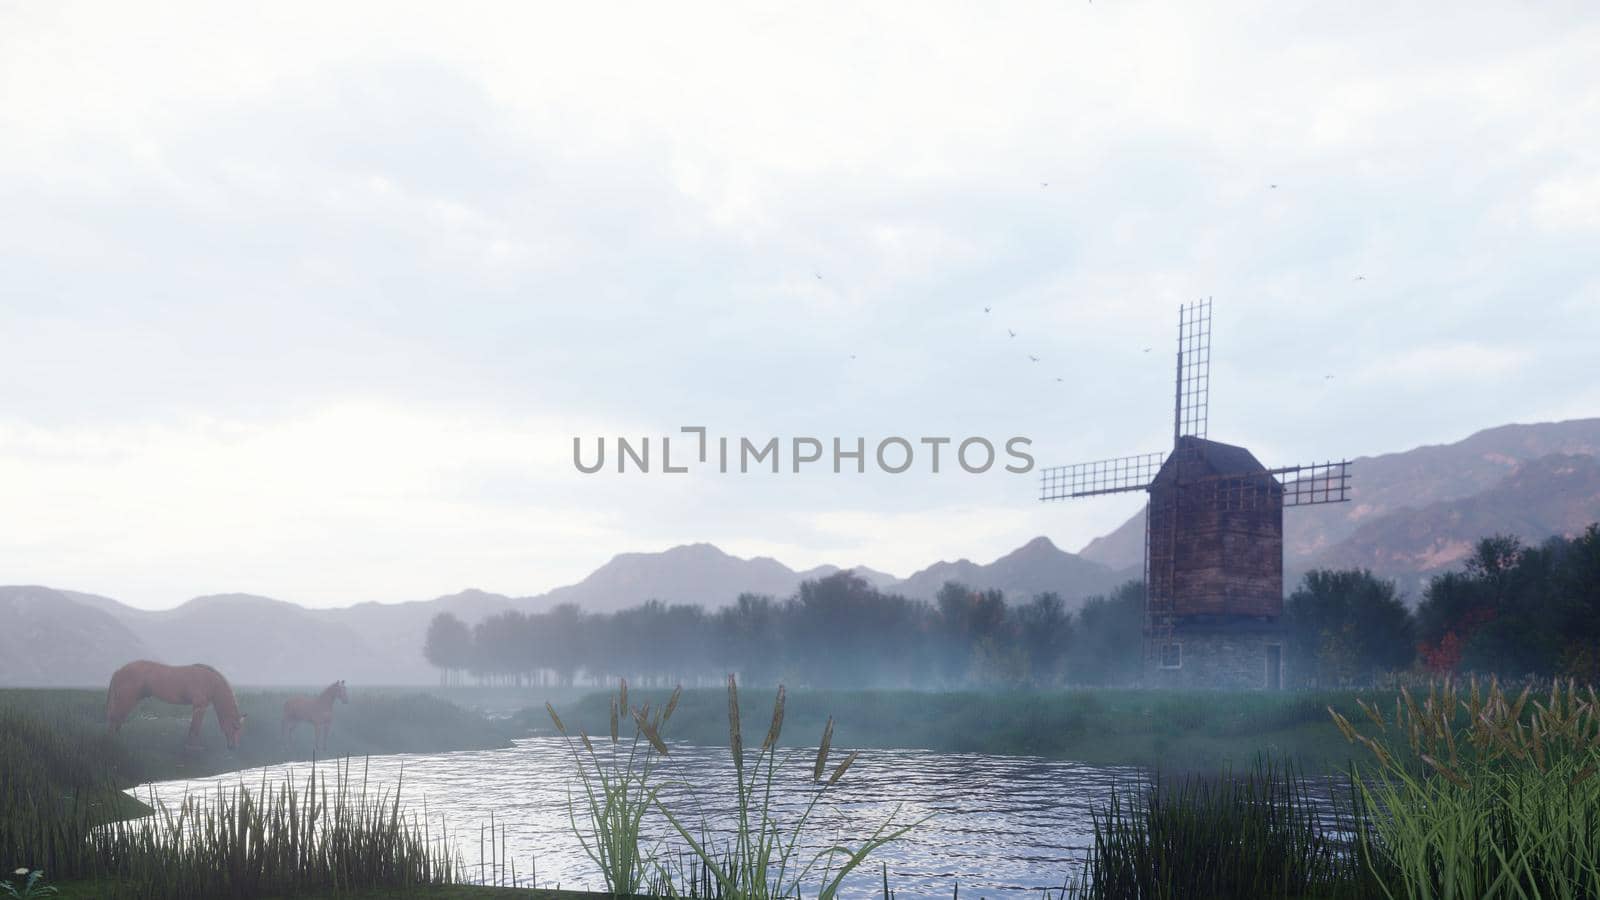 A rural misty morning landscape with an old windmill and horses next to a pond, grasses and plants swaying in the wind background a cloudy sky. 3D Rendering by designprojects